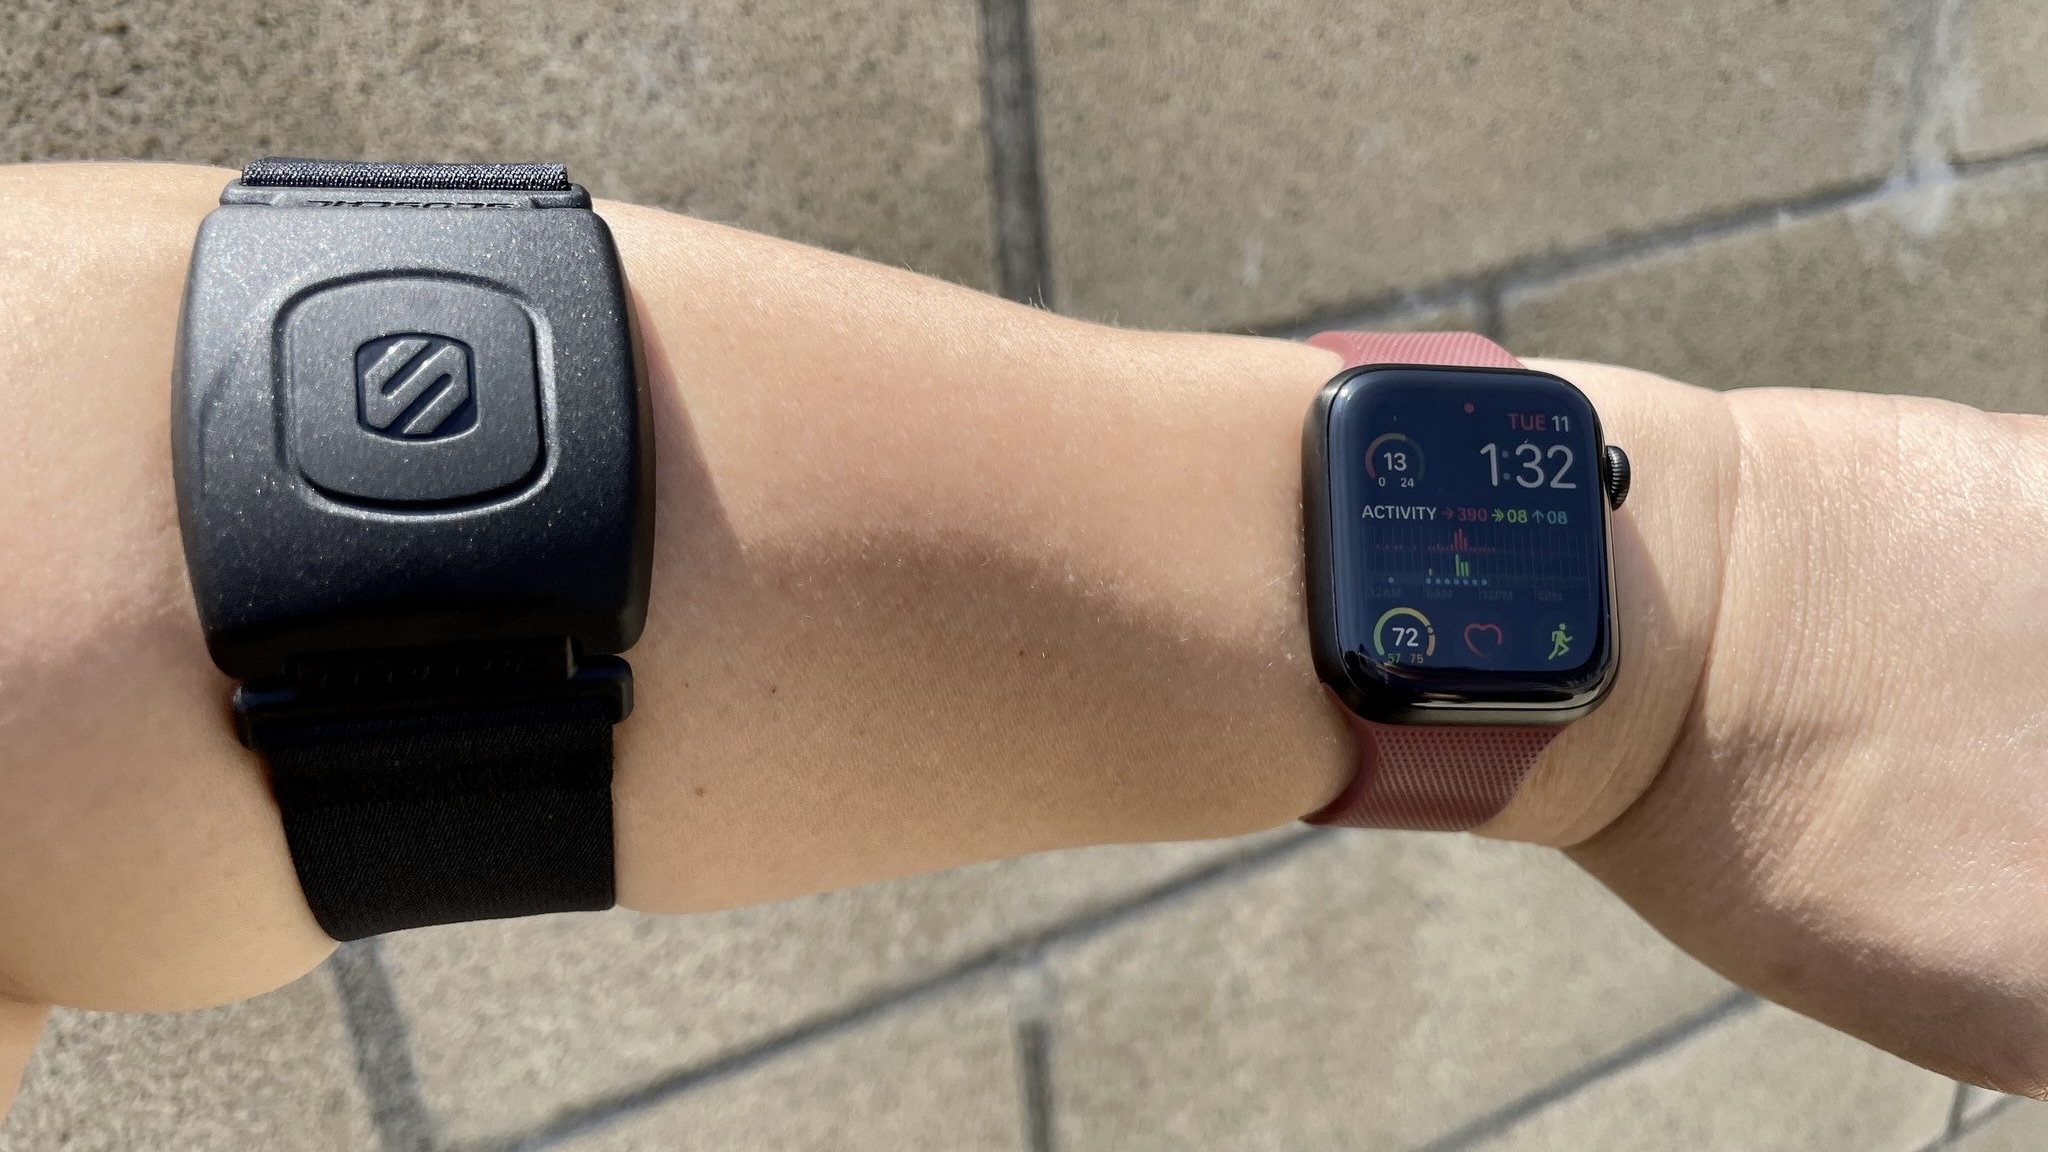 Best fitness and workout accessories for Apple Watch & iPhone users